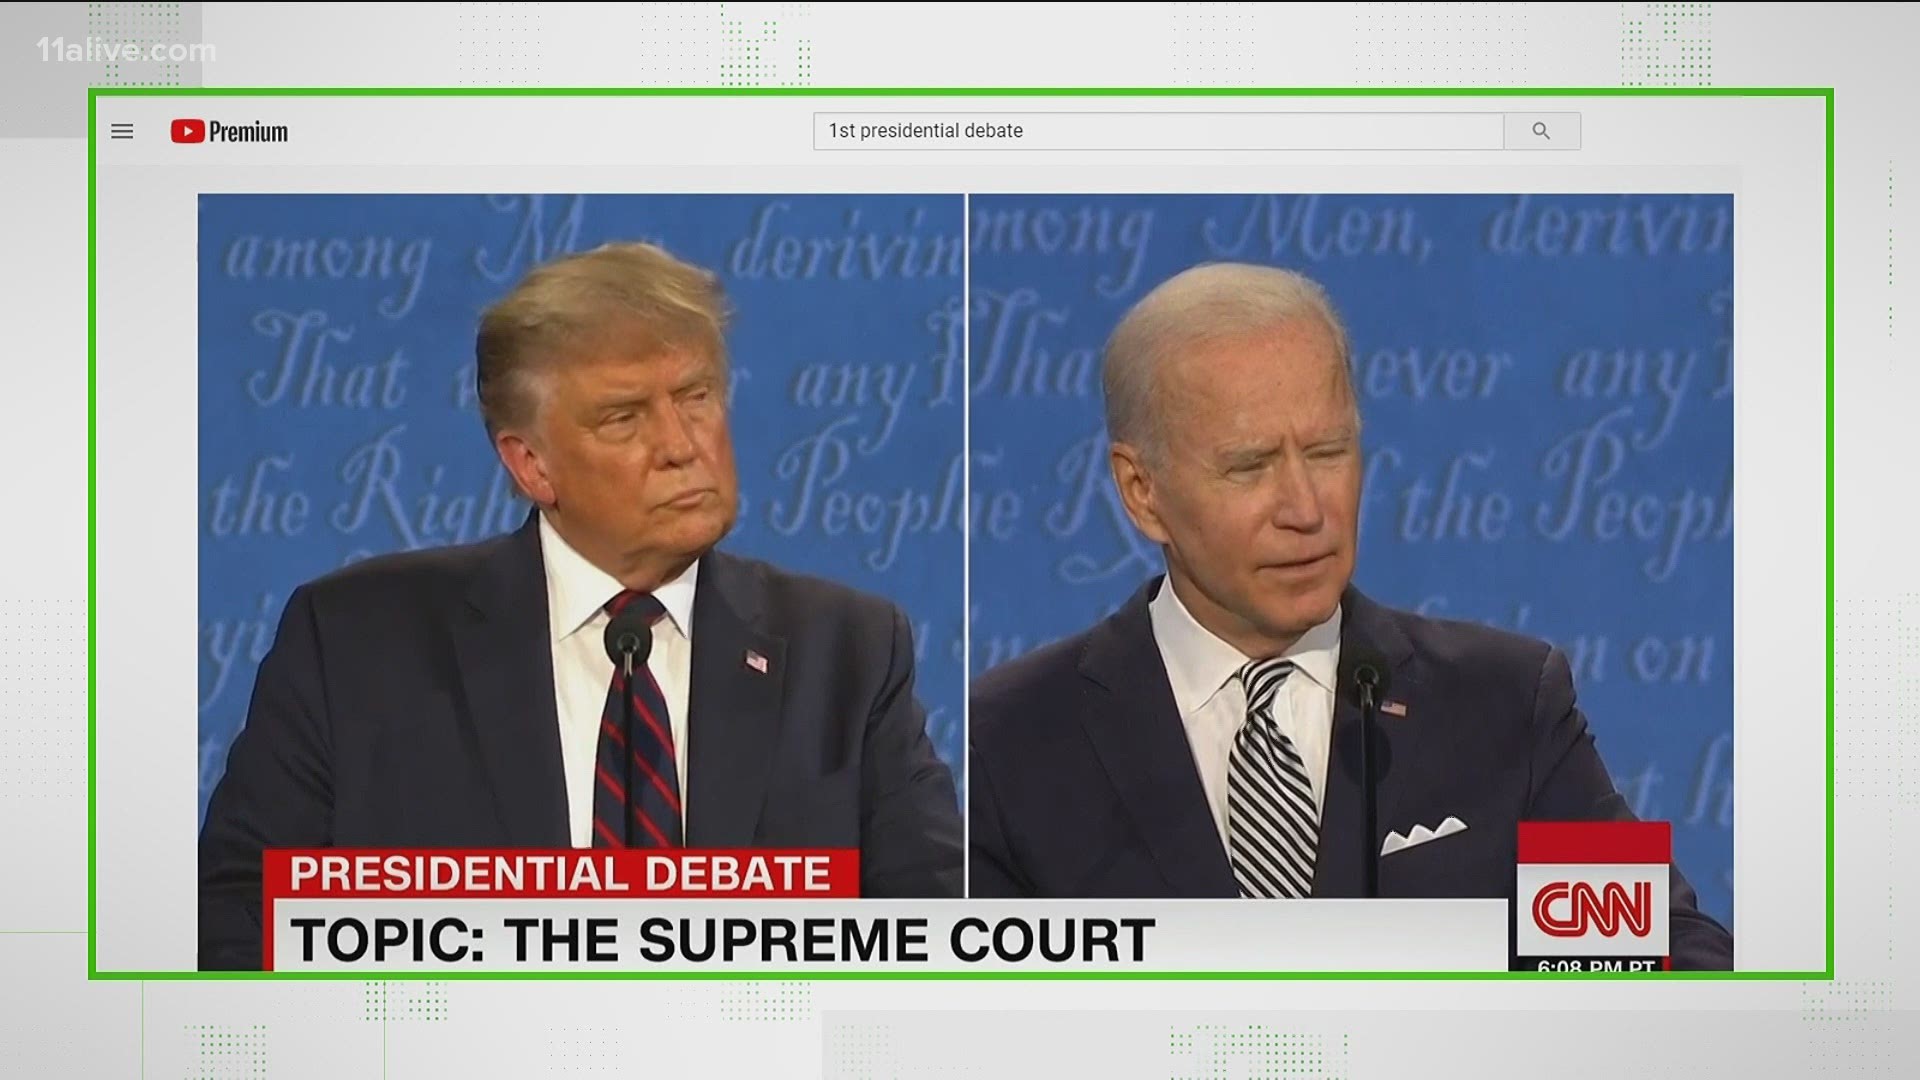 Our VERIFY researchers fact-checked what President Trump and Joe Biden are saying during the first presidential debate.